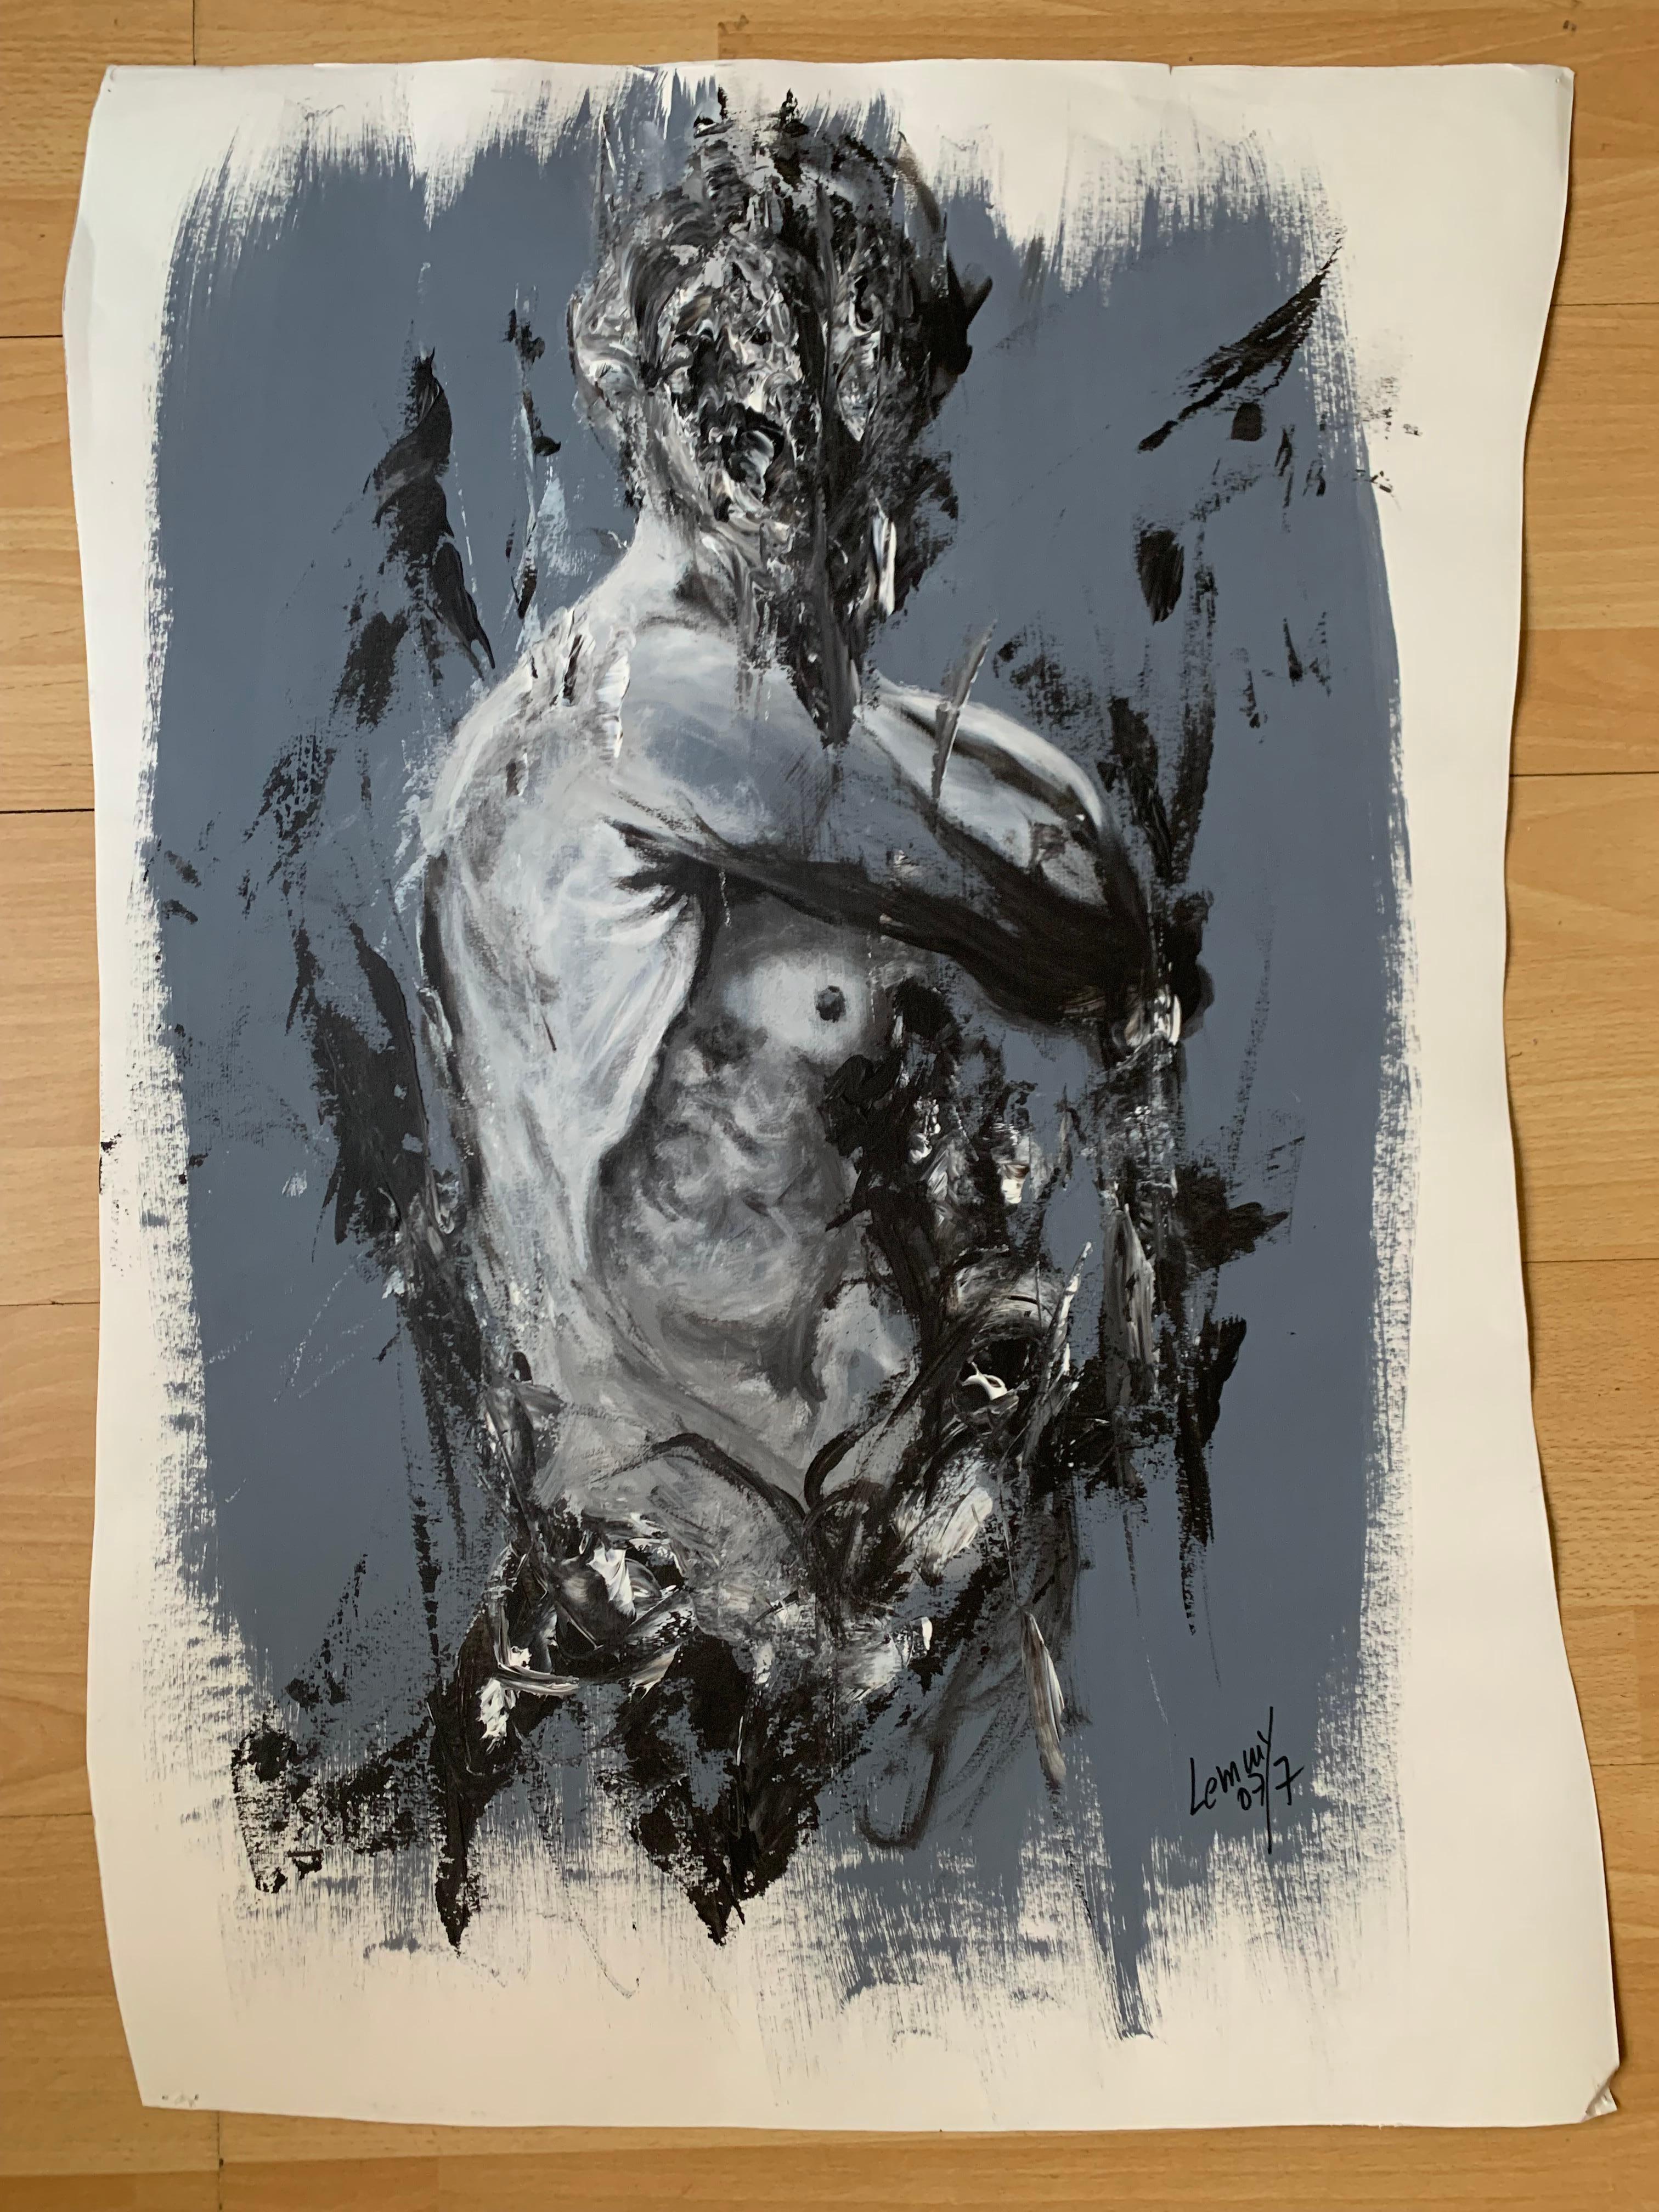 Lemmy Gonthier - Body 2
Acrylic
Numbered and signed lower right of the work
Dimensions: 77 x 68

The human body is at the center of Lemmy's work. His taste for large formats requires precision
striking anatomy. The movement that is suggested in each